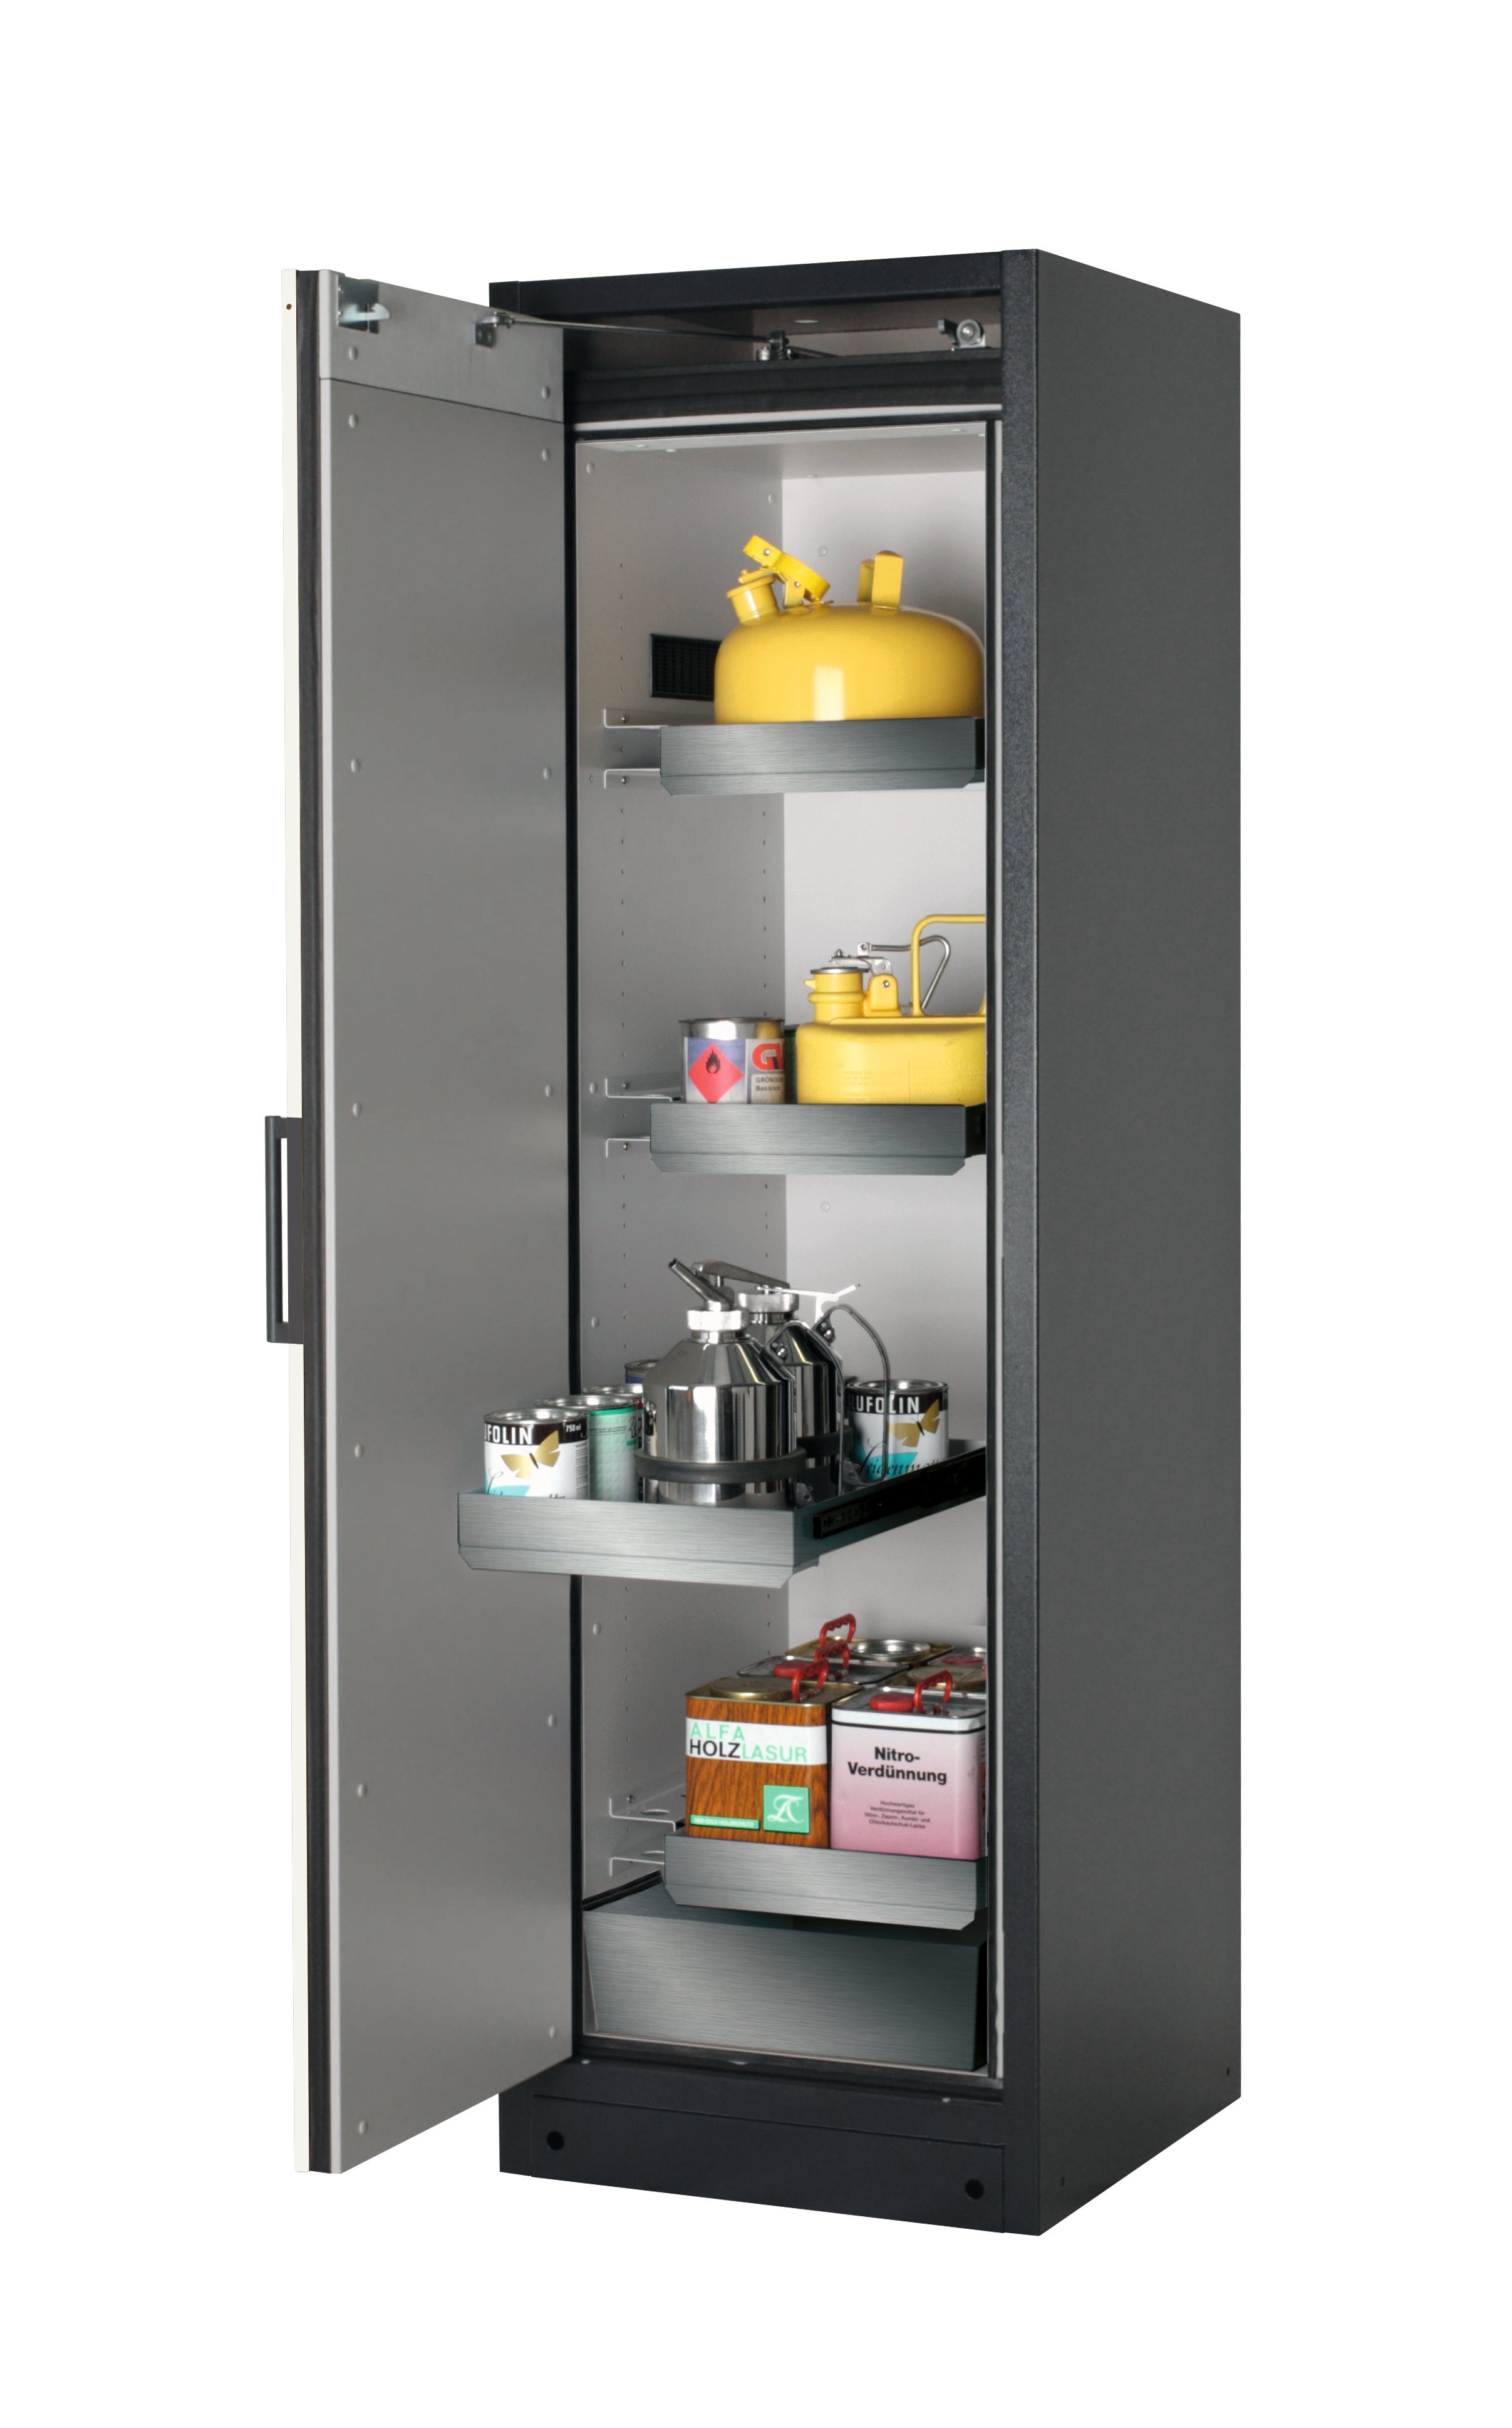 Type 90 safety storage cabinet Q-CLASSIC-90 model Q90.195.060 in asecos silver with 3x drawer (standard) (stainless steel 1.4301),